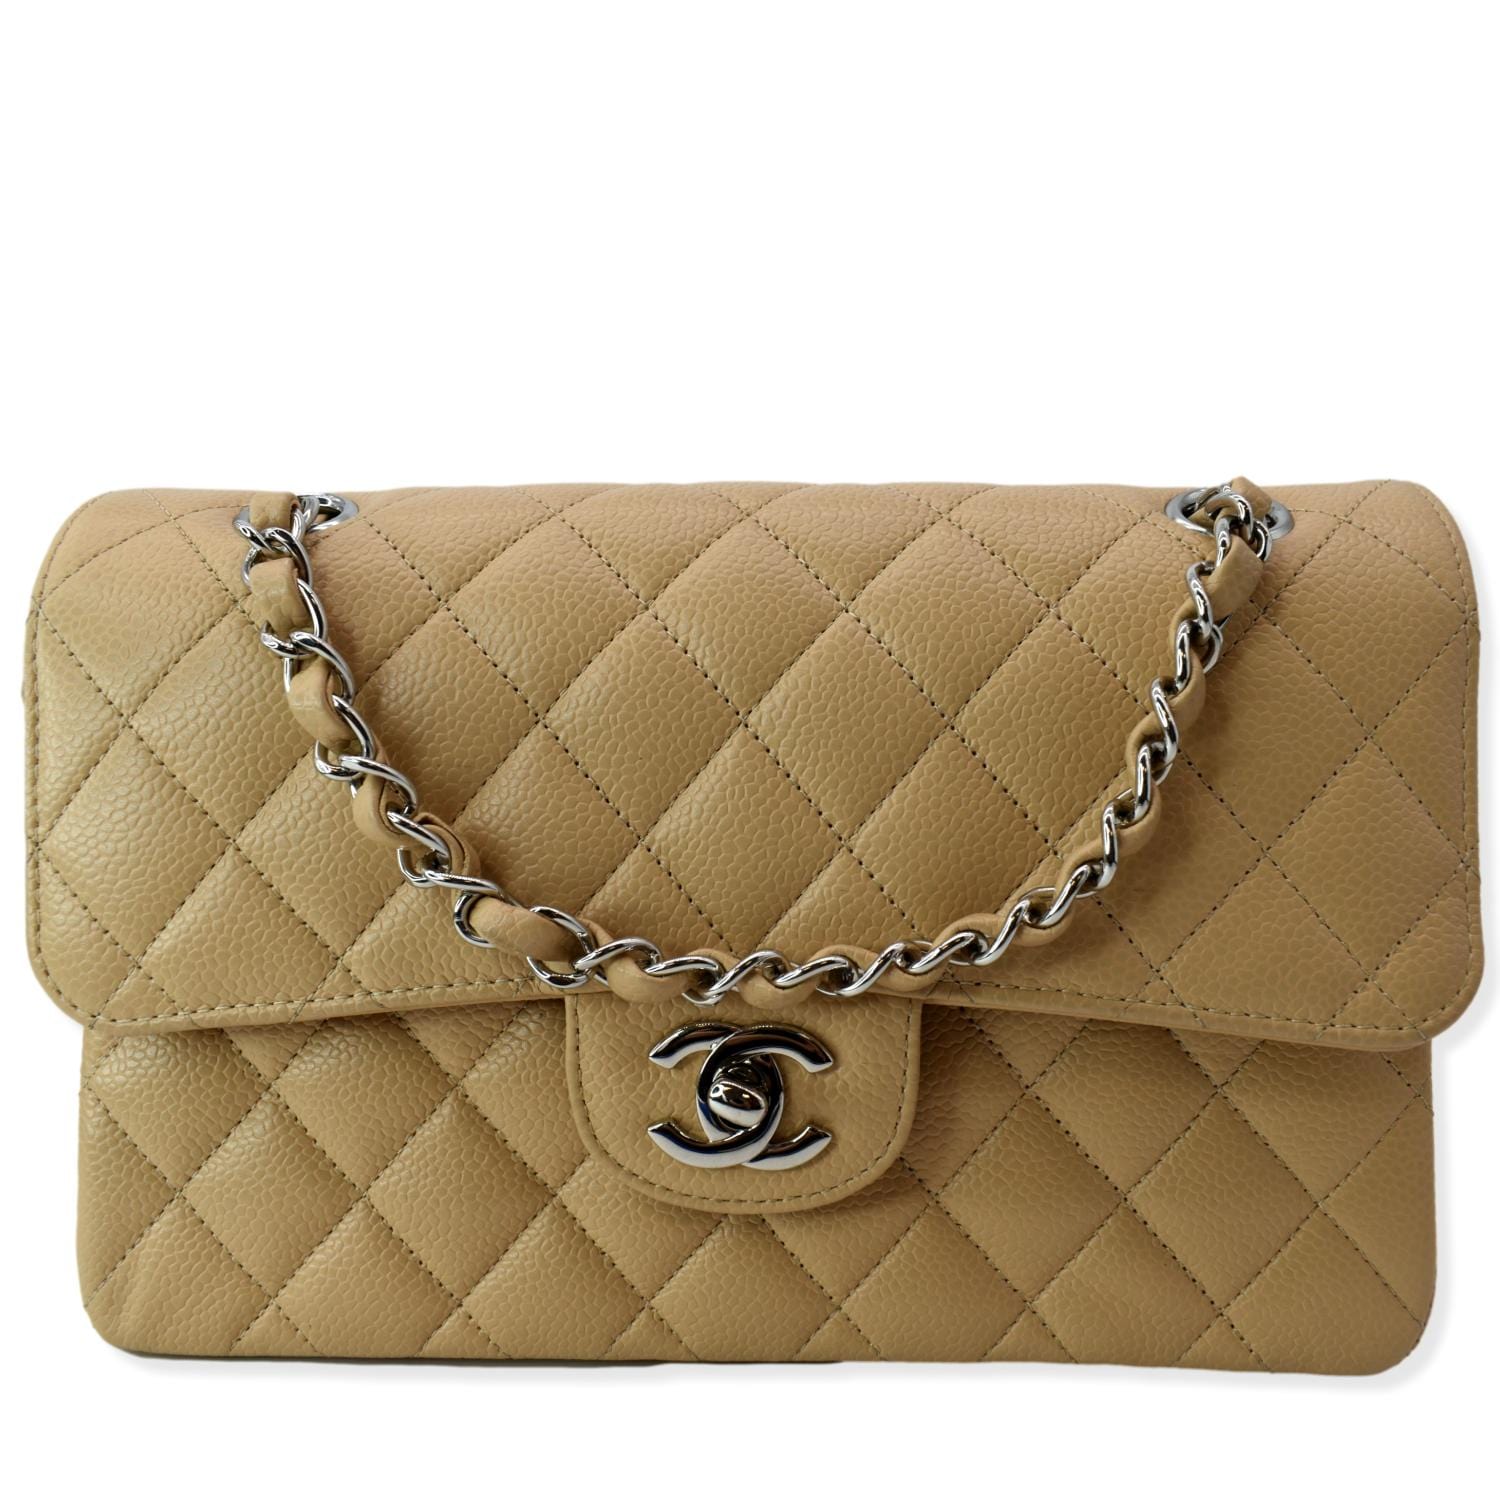 Timeless/classique leather crossbody bag Chanel Beige in Leather